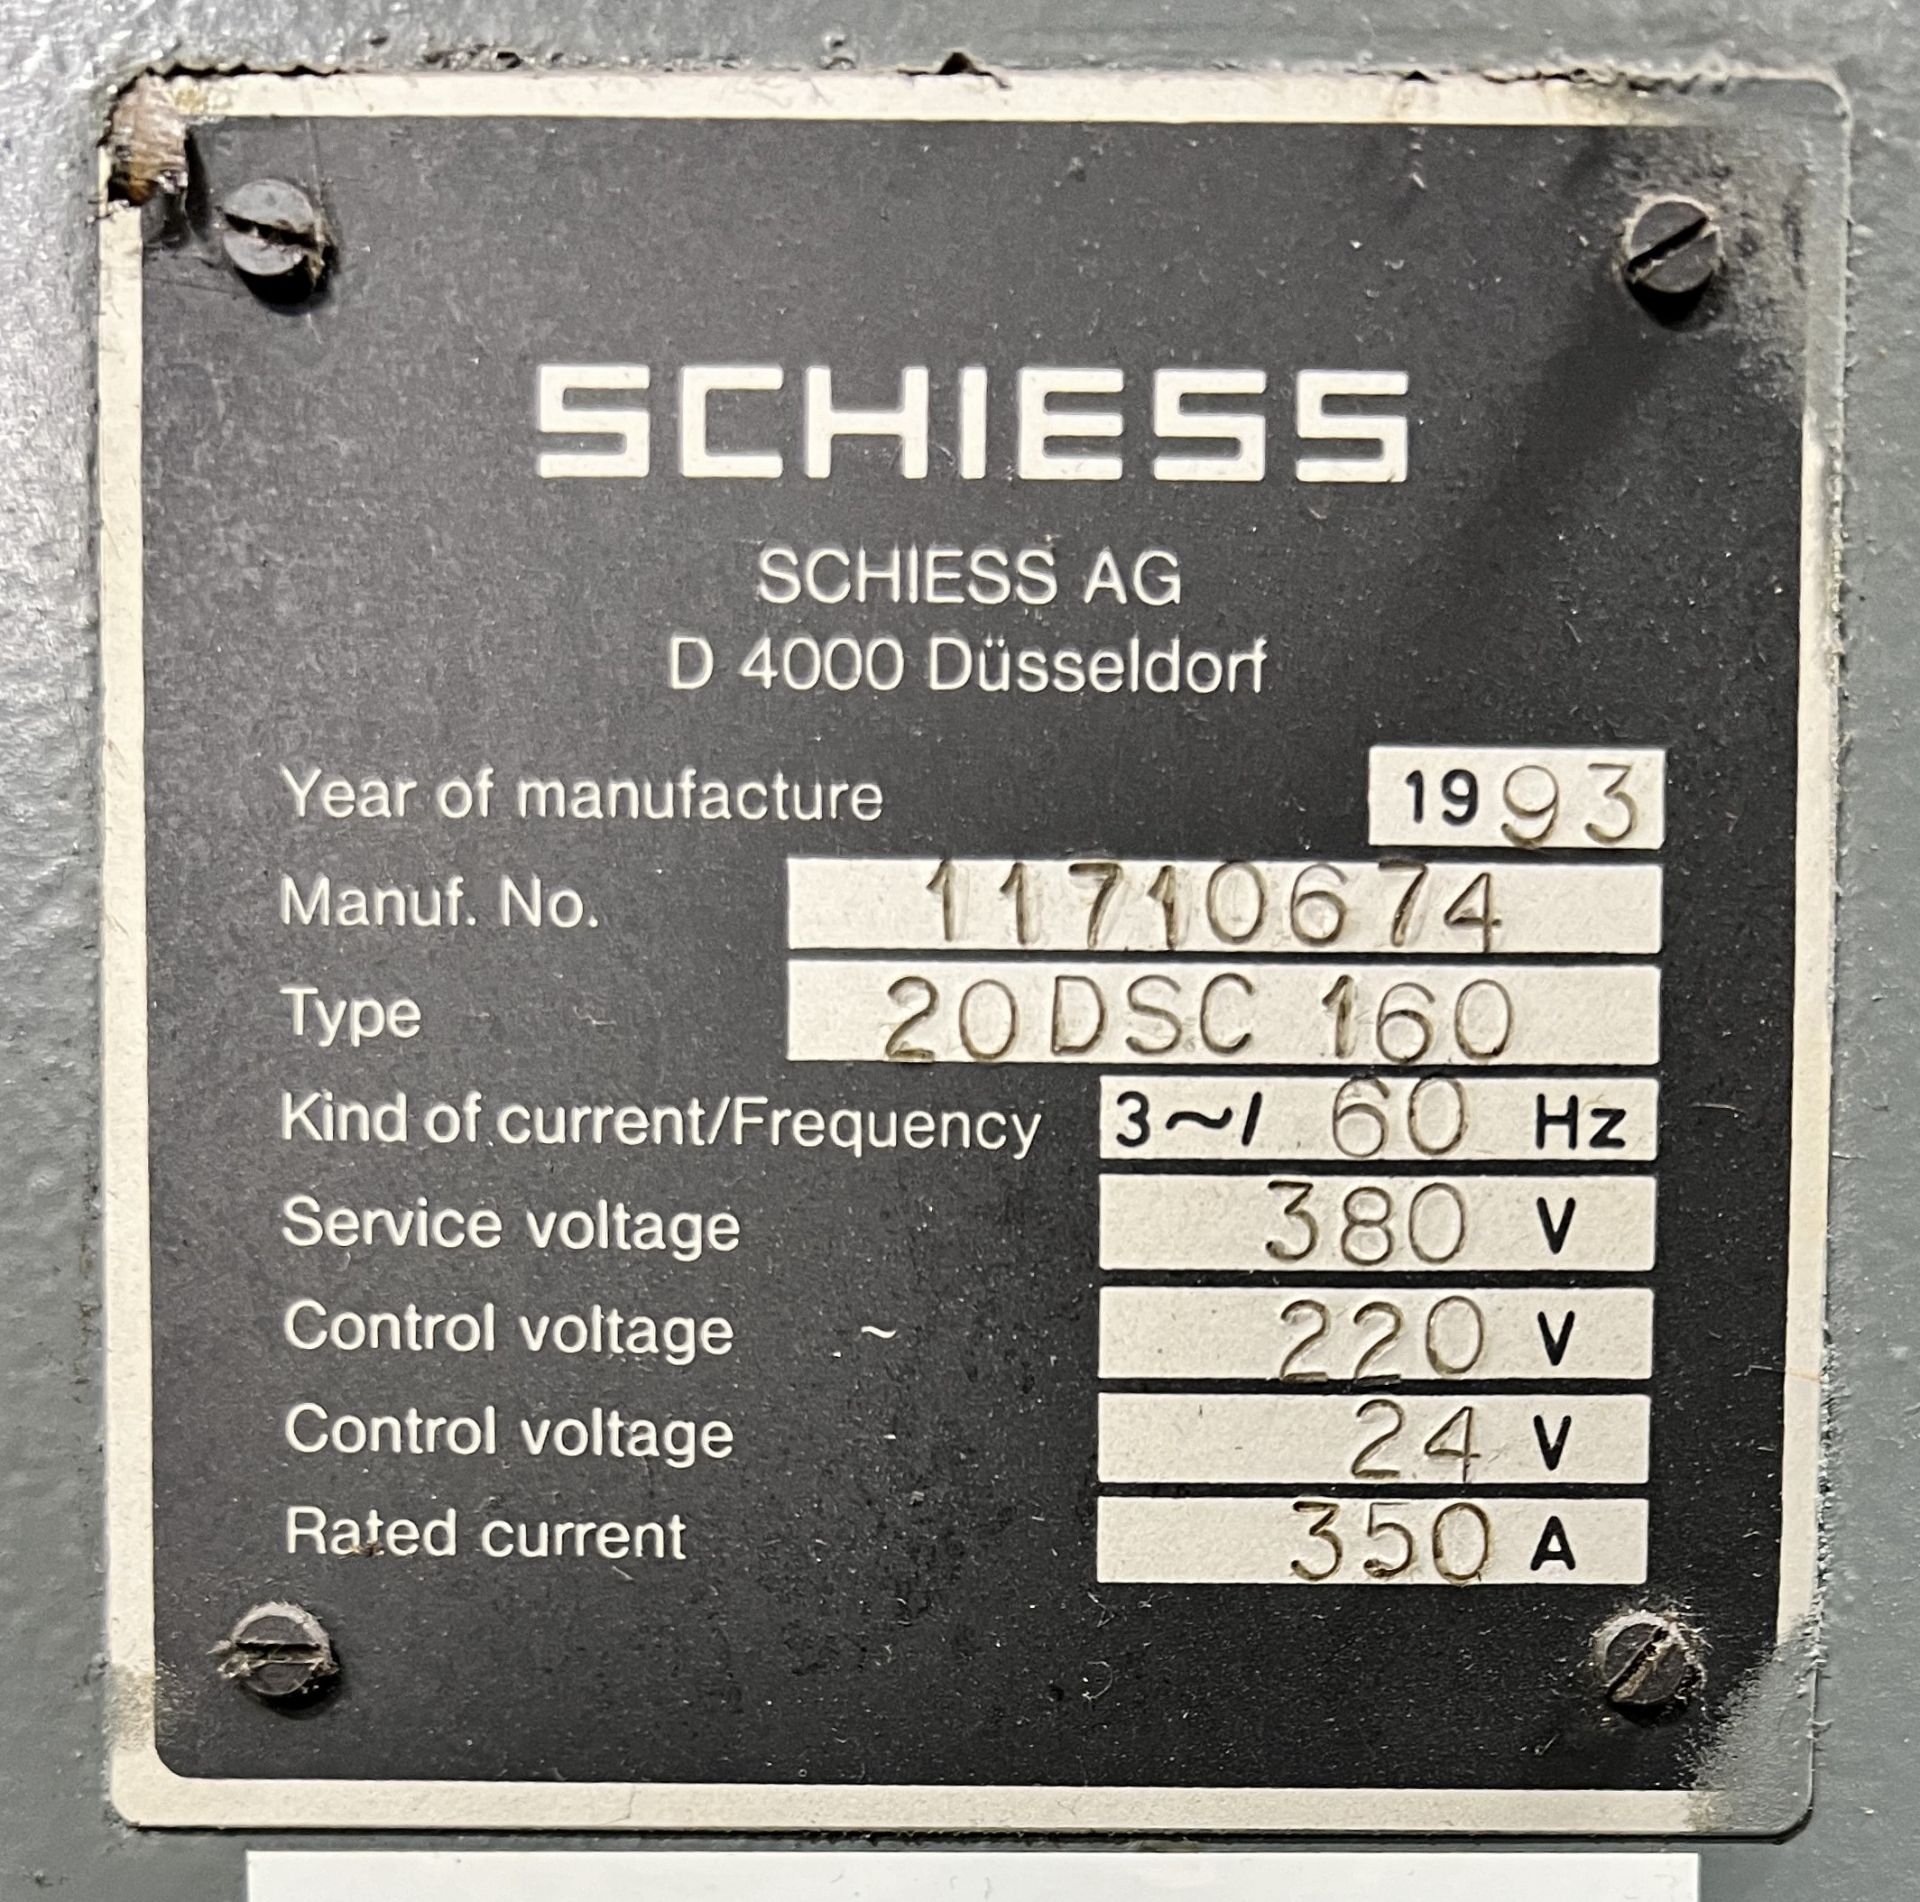 63" Schiess 20DSC160 CNC Vertical Turning Center - Image 10 of 10